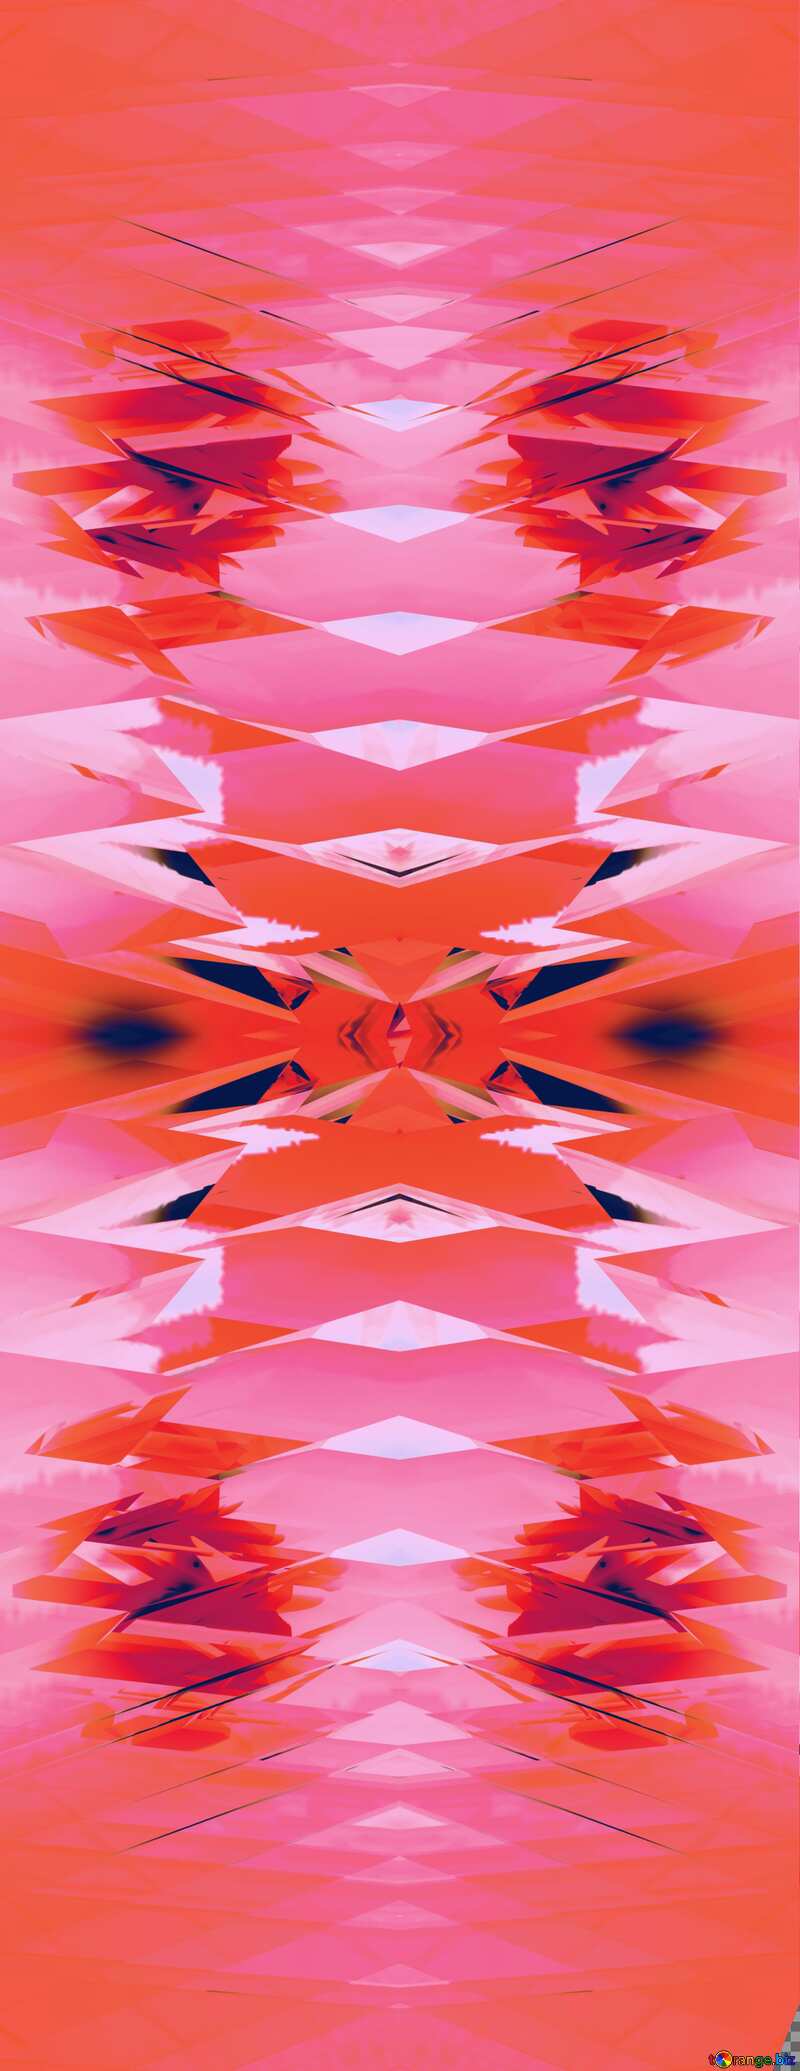 Futuristic abstract pink symmerty water ripples №51524